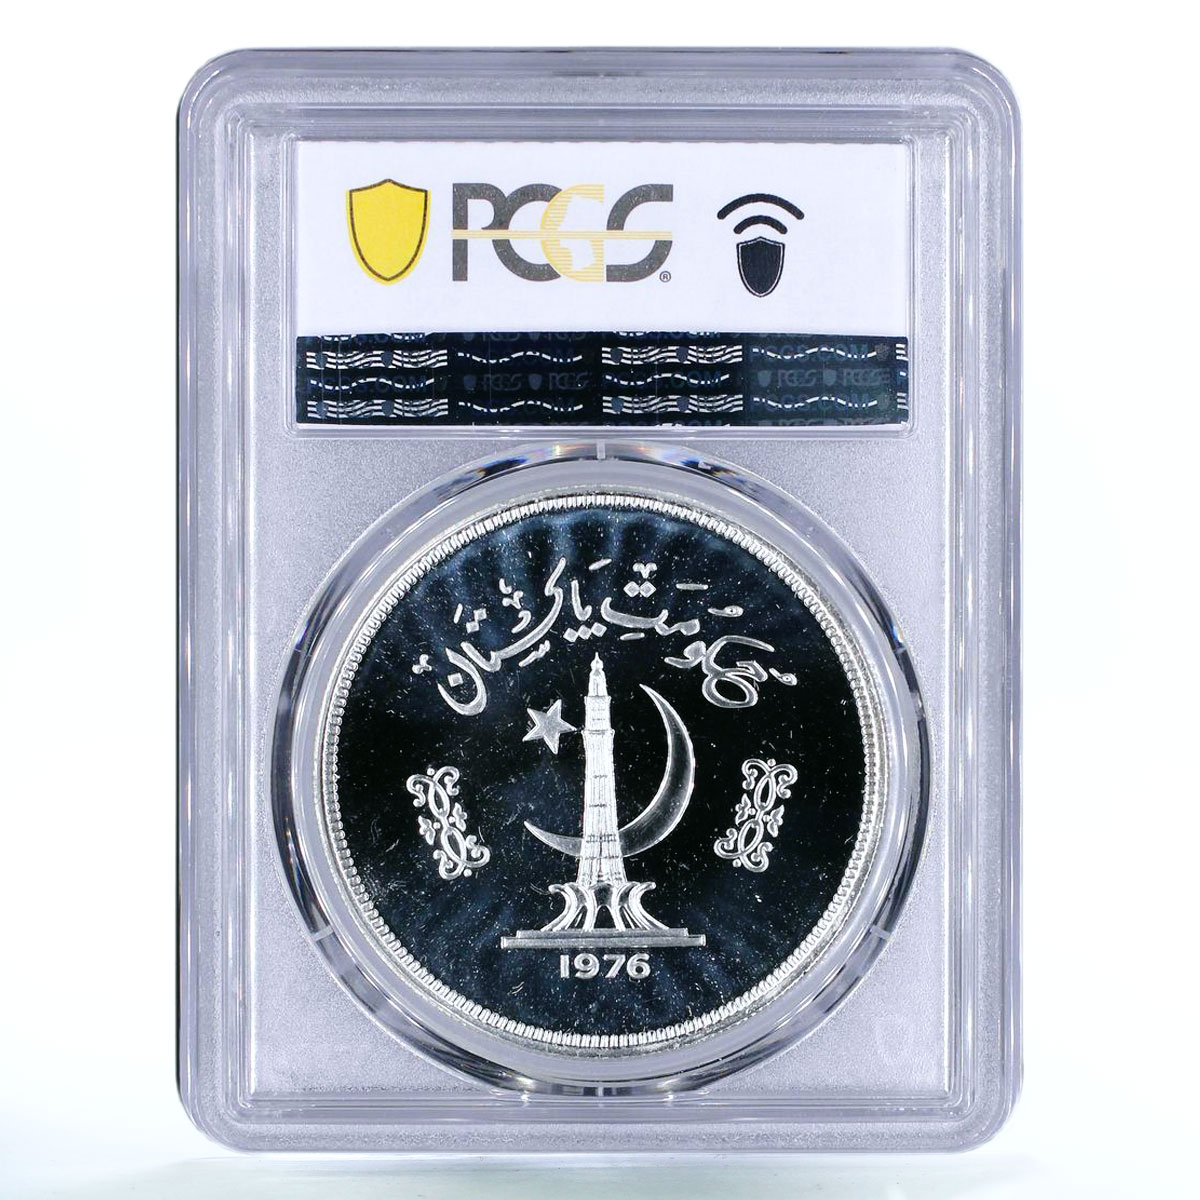 Pakistan 150 rupees WWF series Gavial Crocodile MS68 PCGS proof silver coin 1976